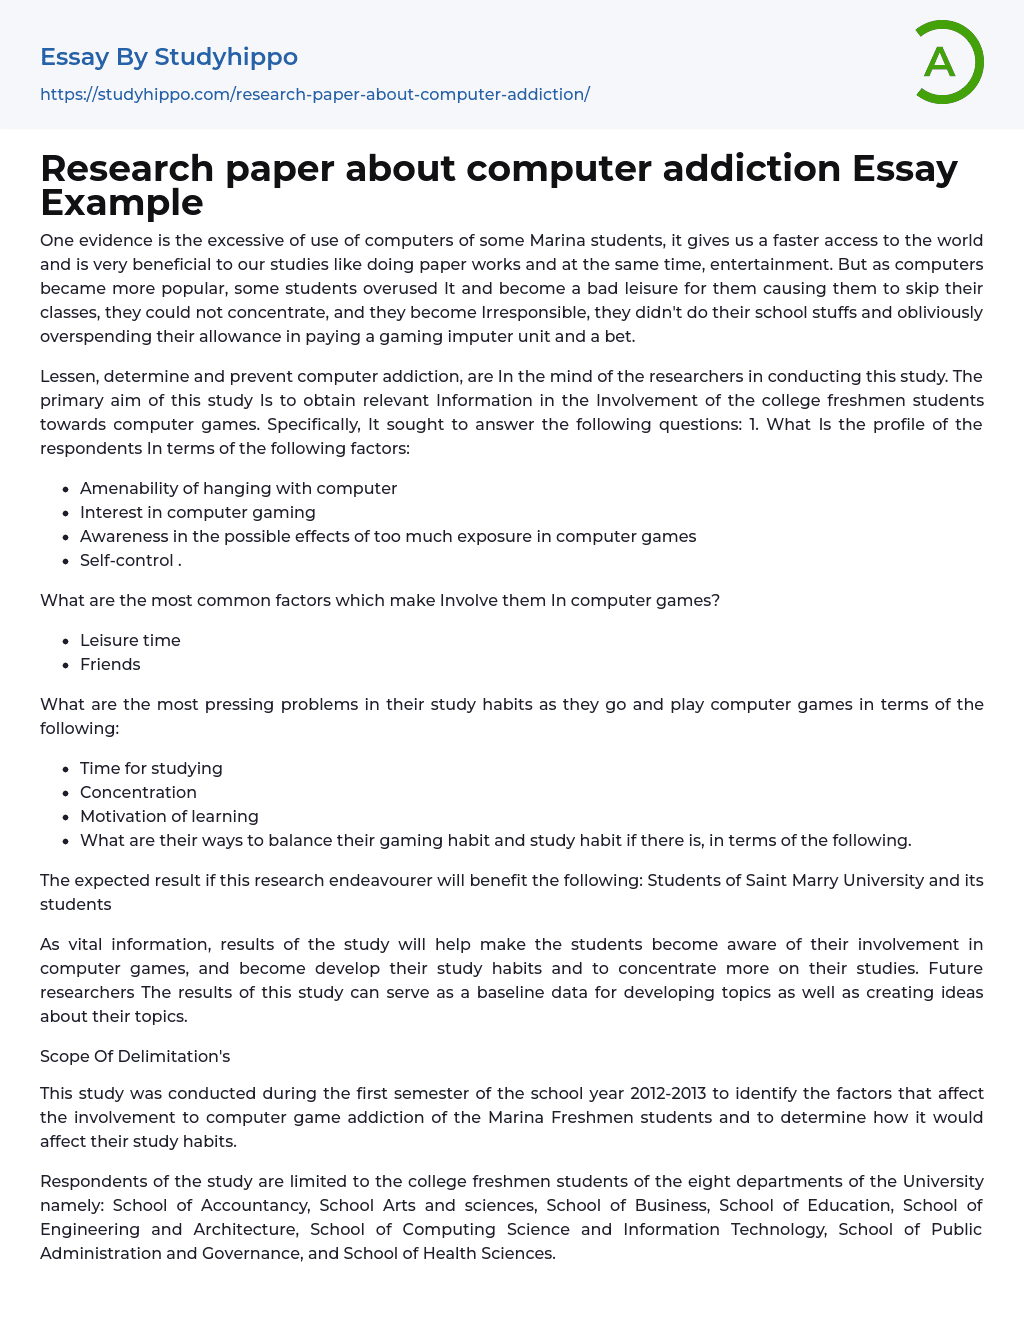 Research paper about computer addiction Essay Example